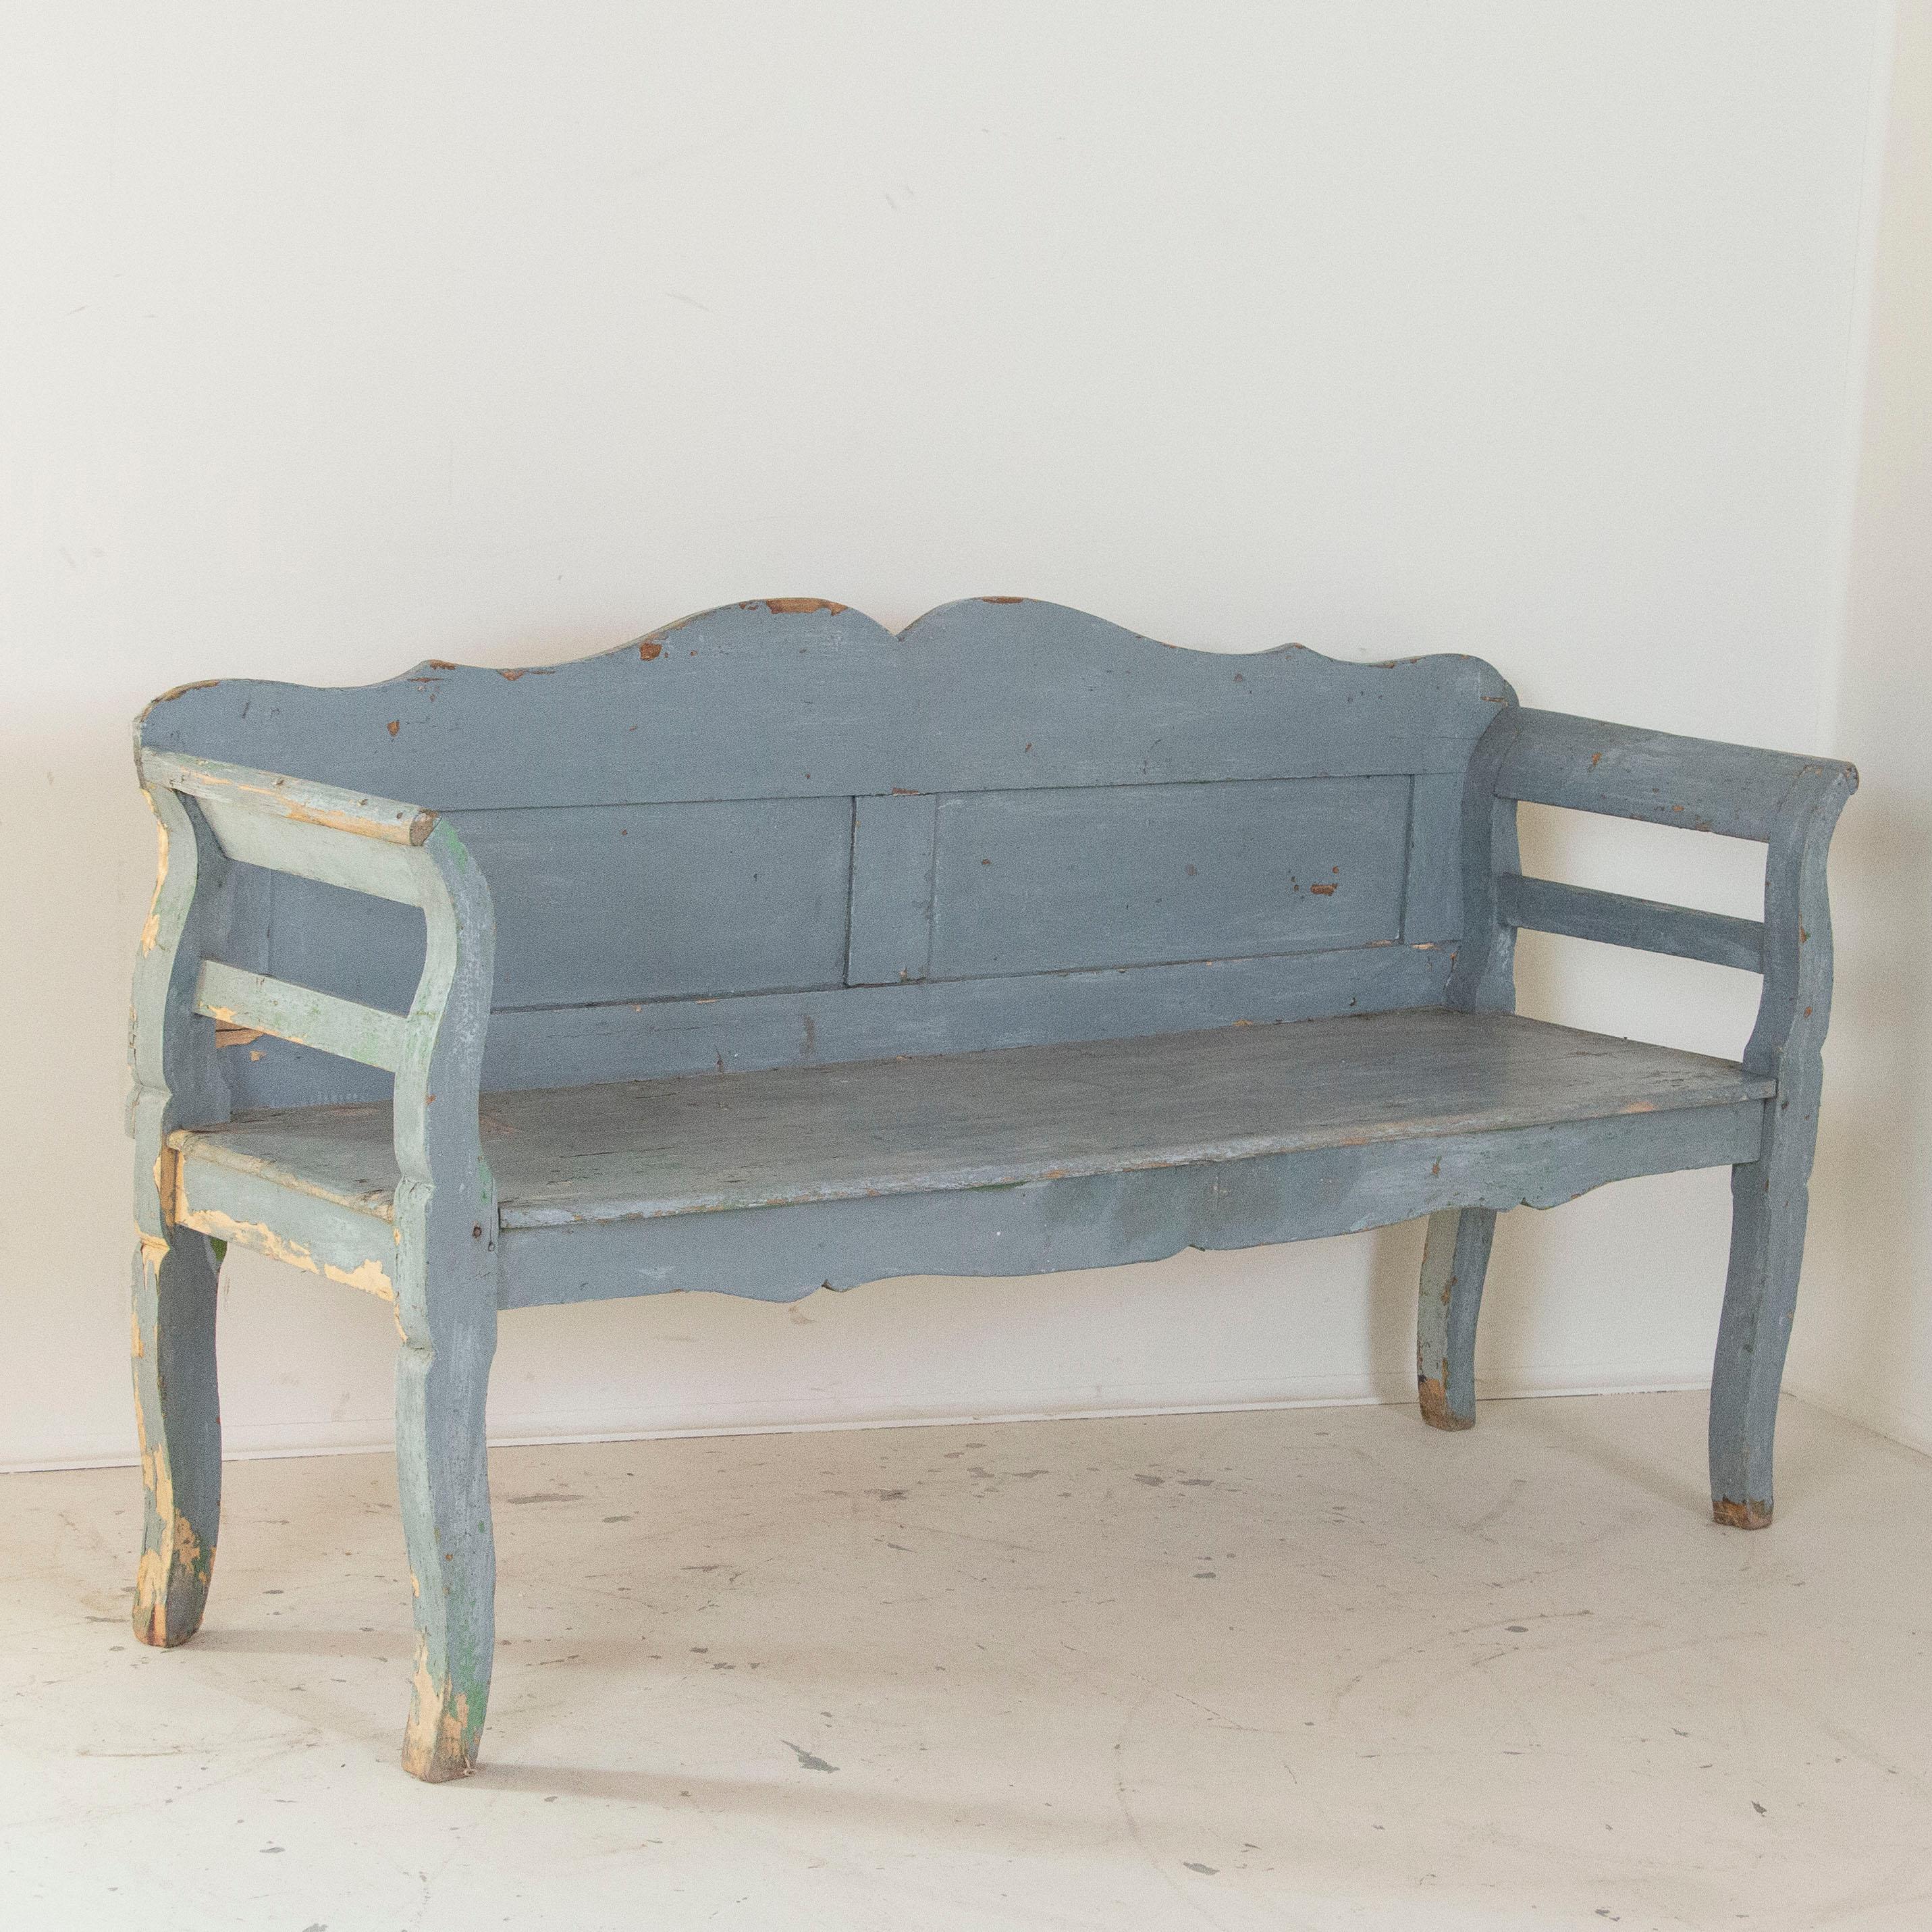 This delightful bench reminds one of a lazy summer day in the European countryside with blue skies above. The blue paint is all original, but has been naturally worn and distressed over time which adds to the character and charm of the bench. Please